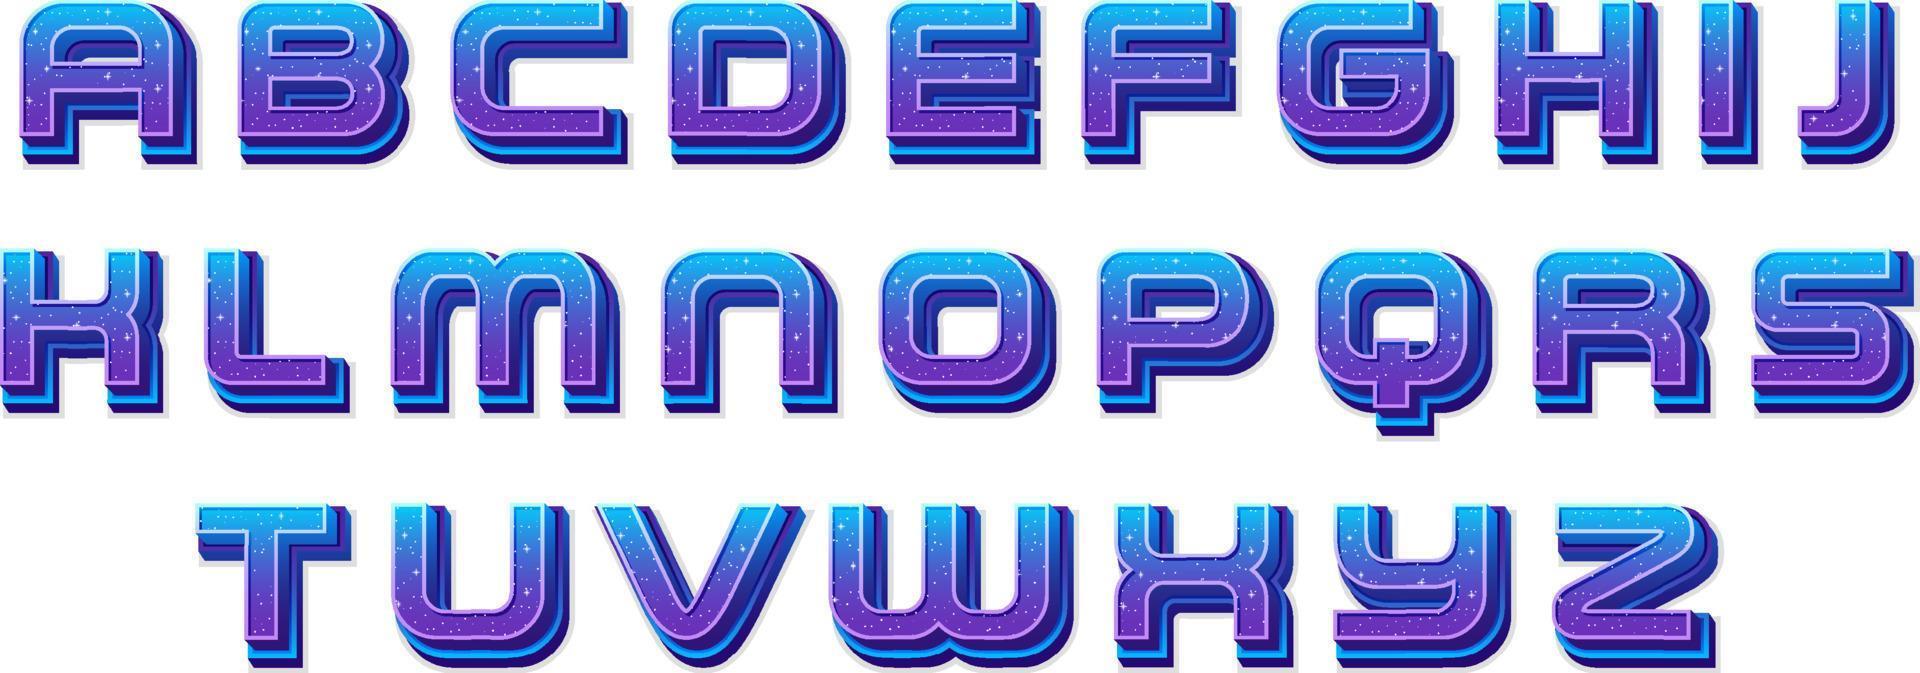 A set of English alphabet space font on white background vector